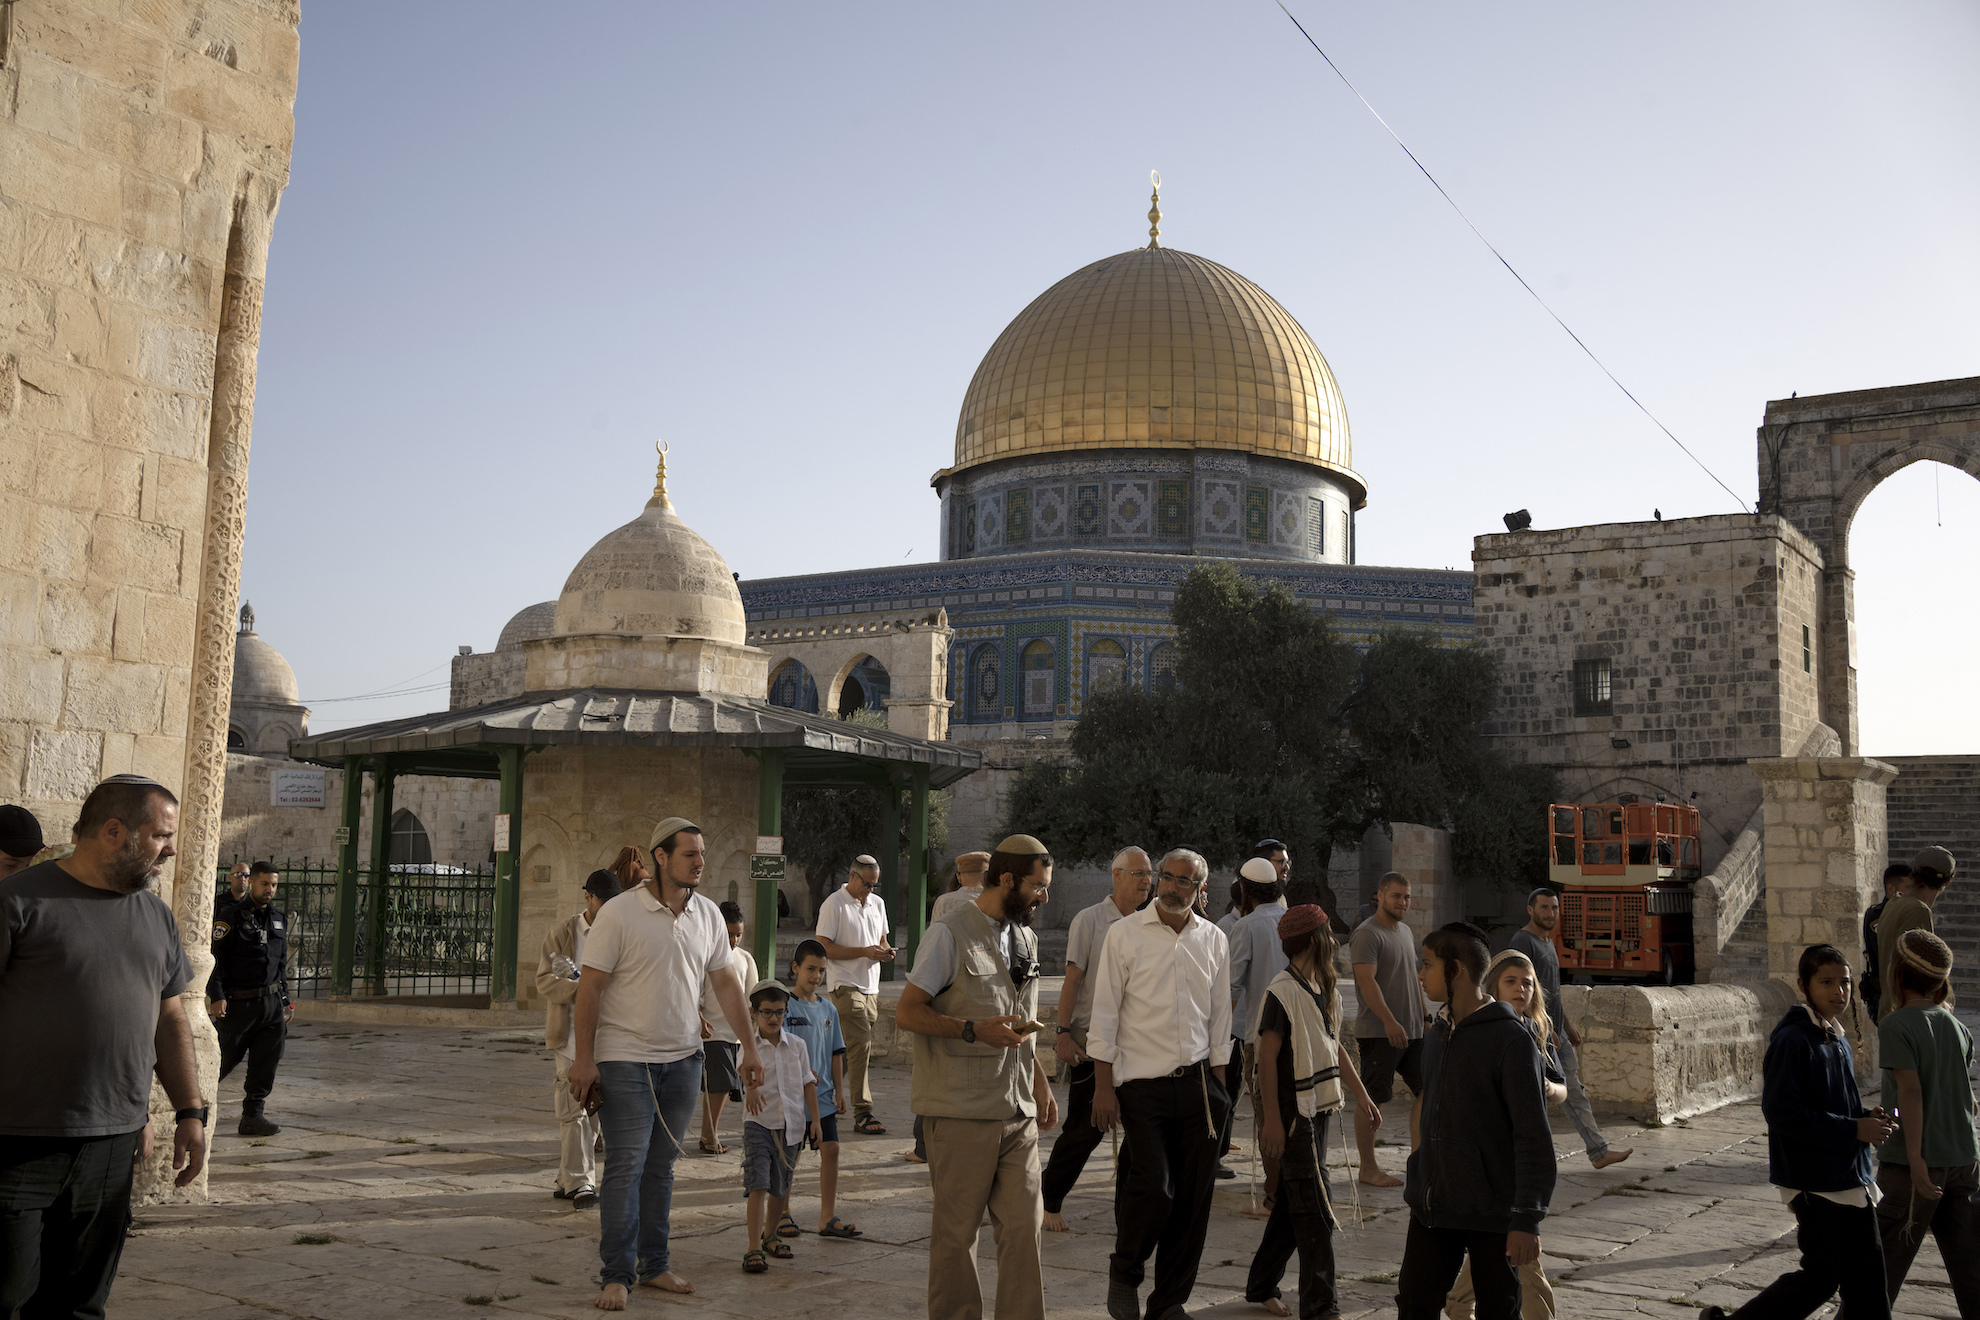 Jews visit the Temple Mount, known to Muslims as the Noble Sanctuary, on the Al-Aqsa Mosque compound in the Old City of Jerusalem, on the morning before Rosh Hashana, the Jewish New Year, which begins at sundown, Sunday, Sept. 25, 2022.